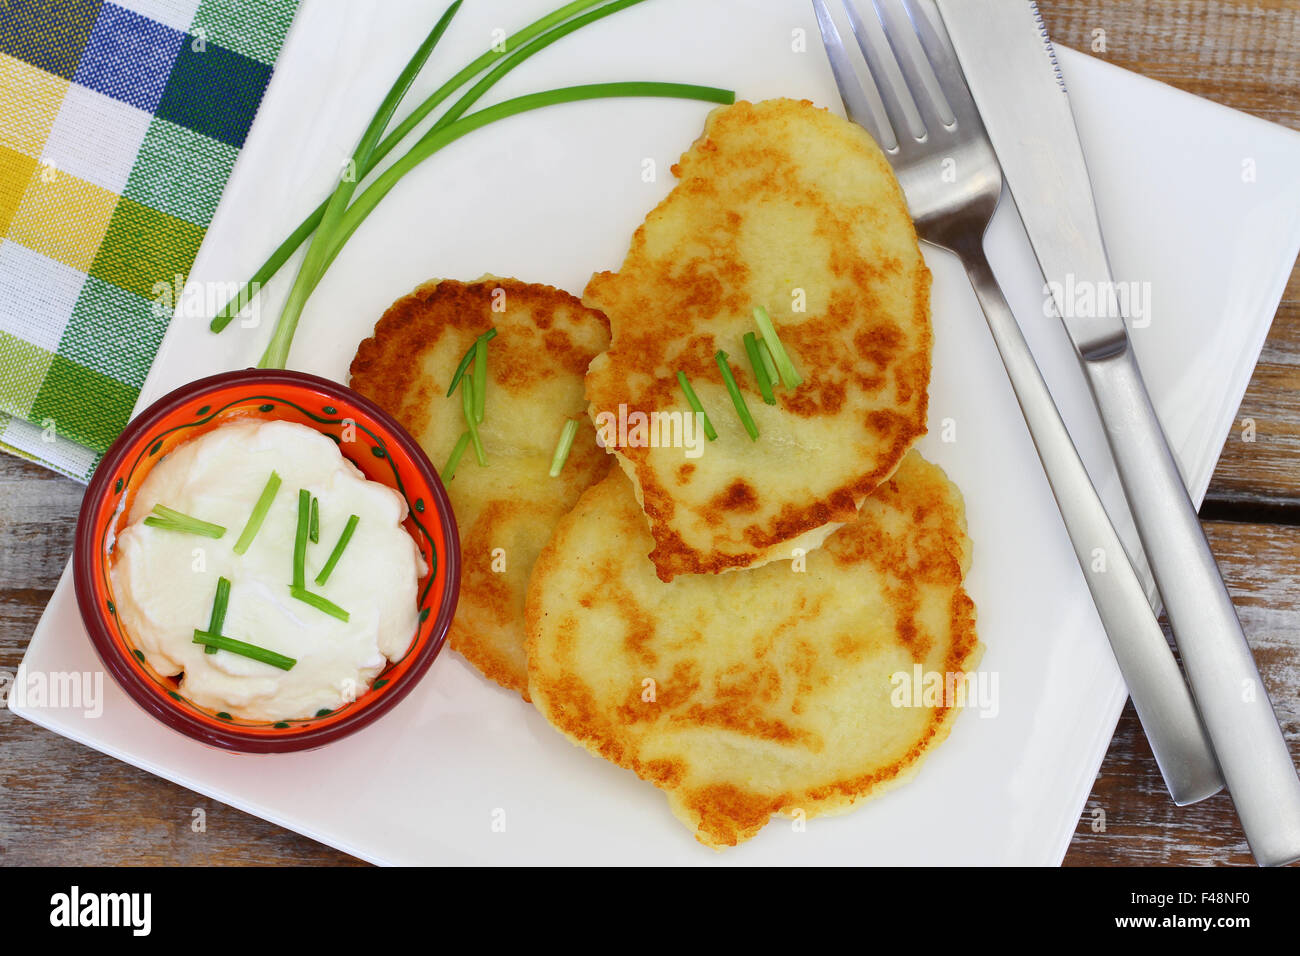 Potato fritters on white plate with bowl of sour cream Stock Photo